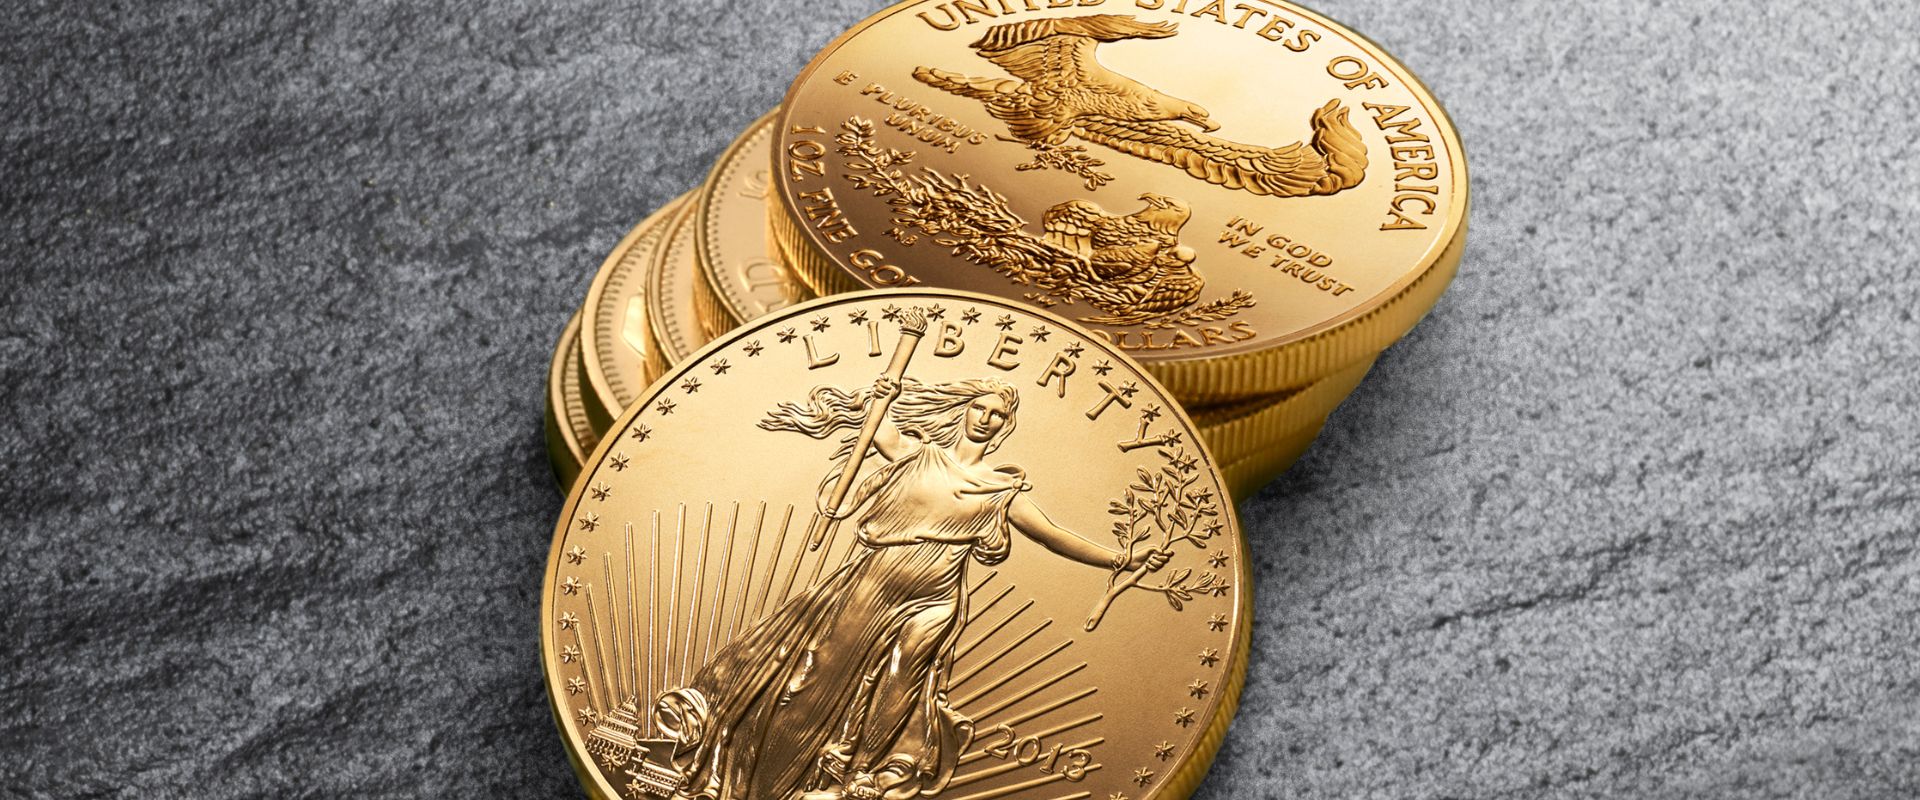 one ounce north American eagle gold coin 2020